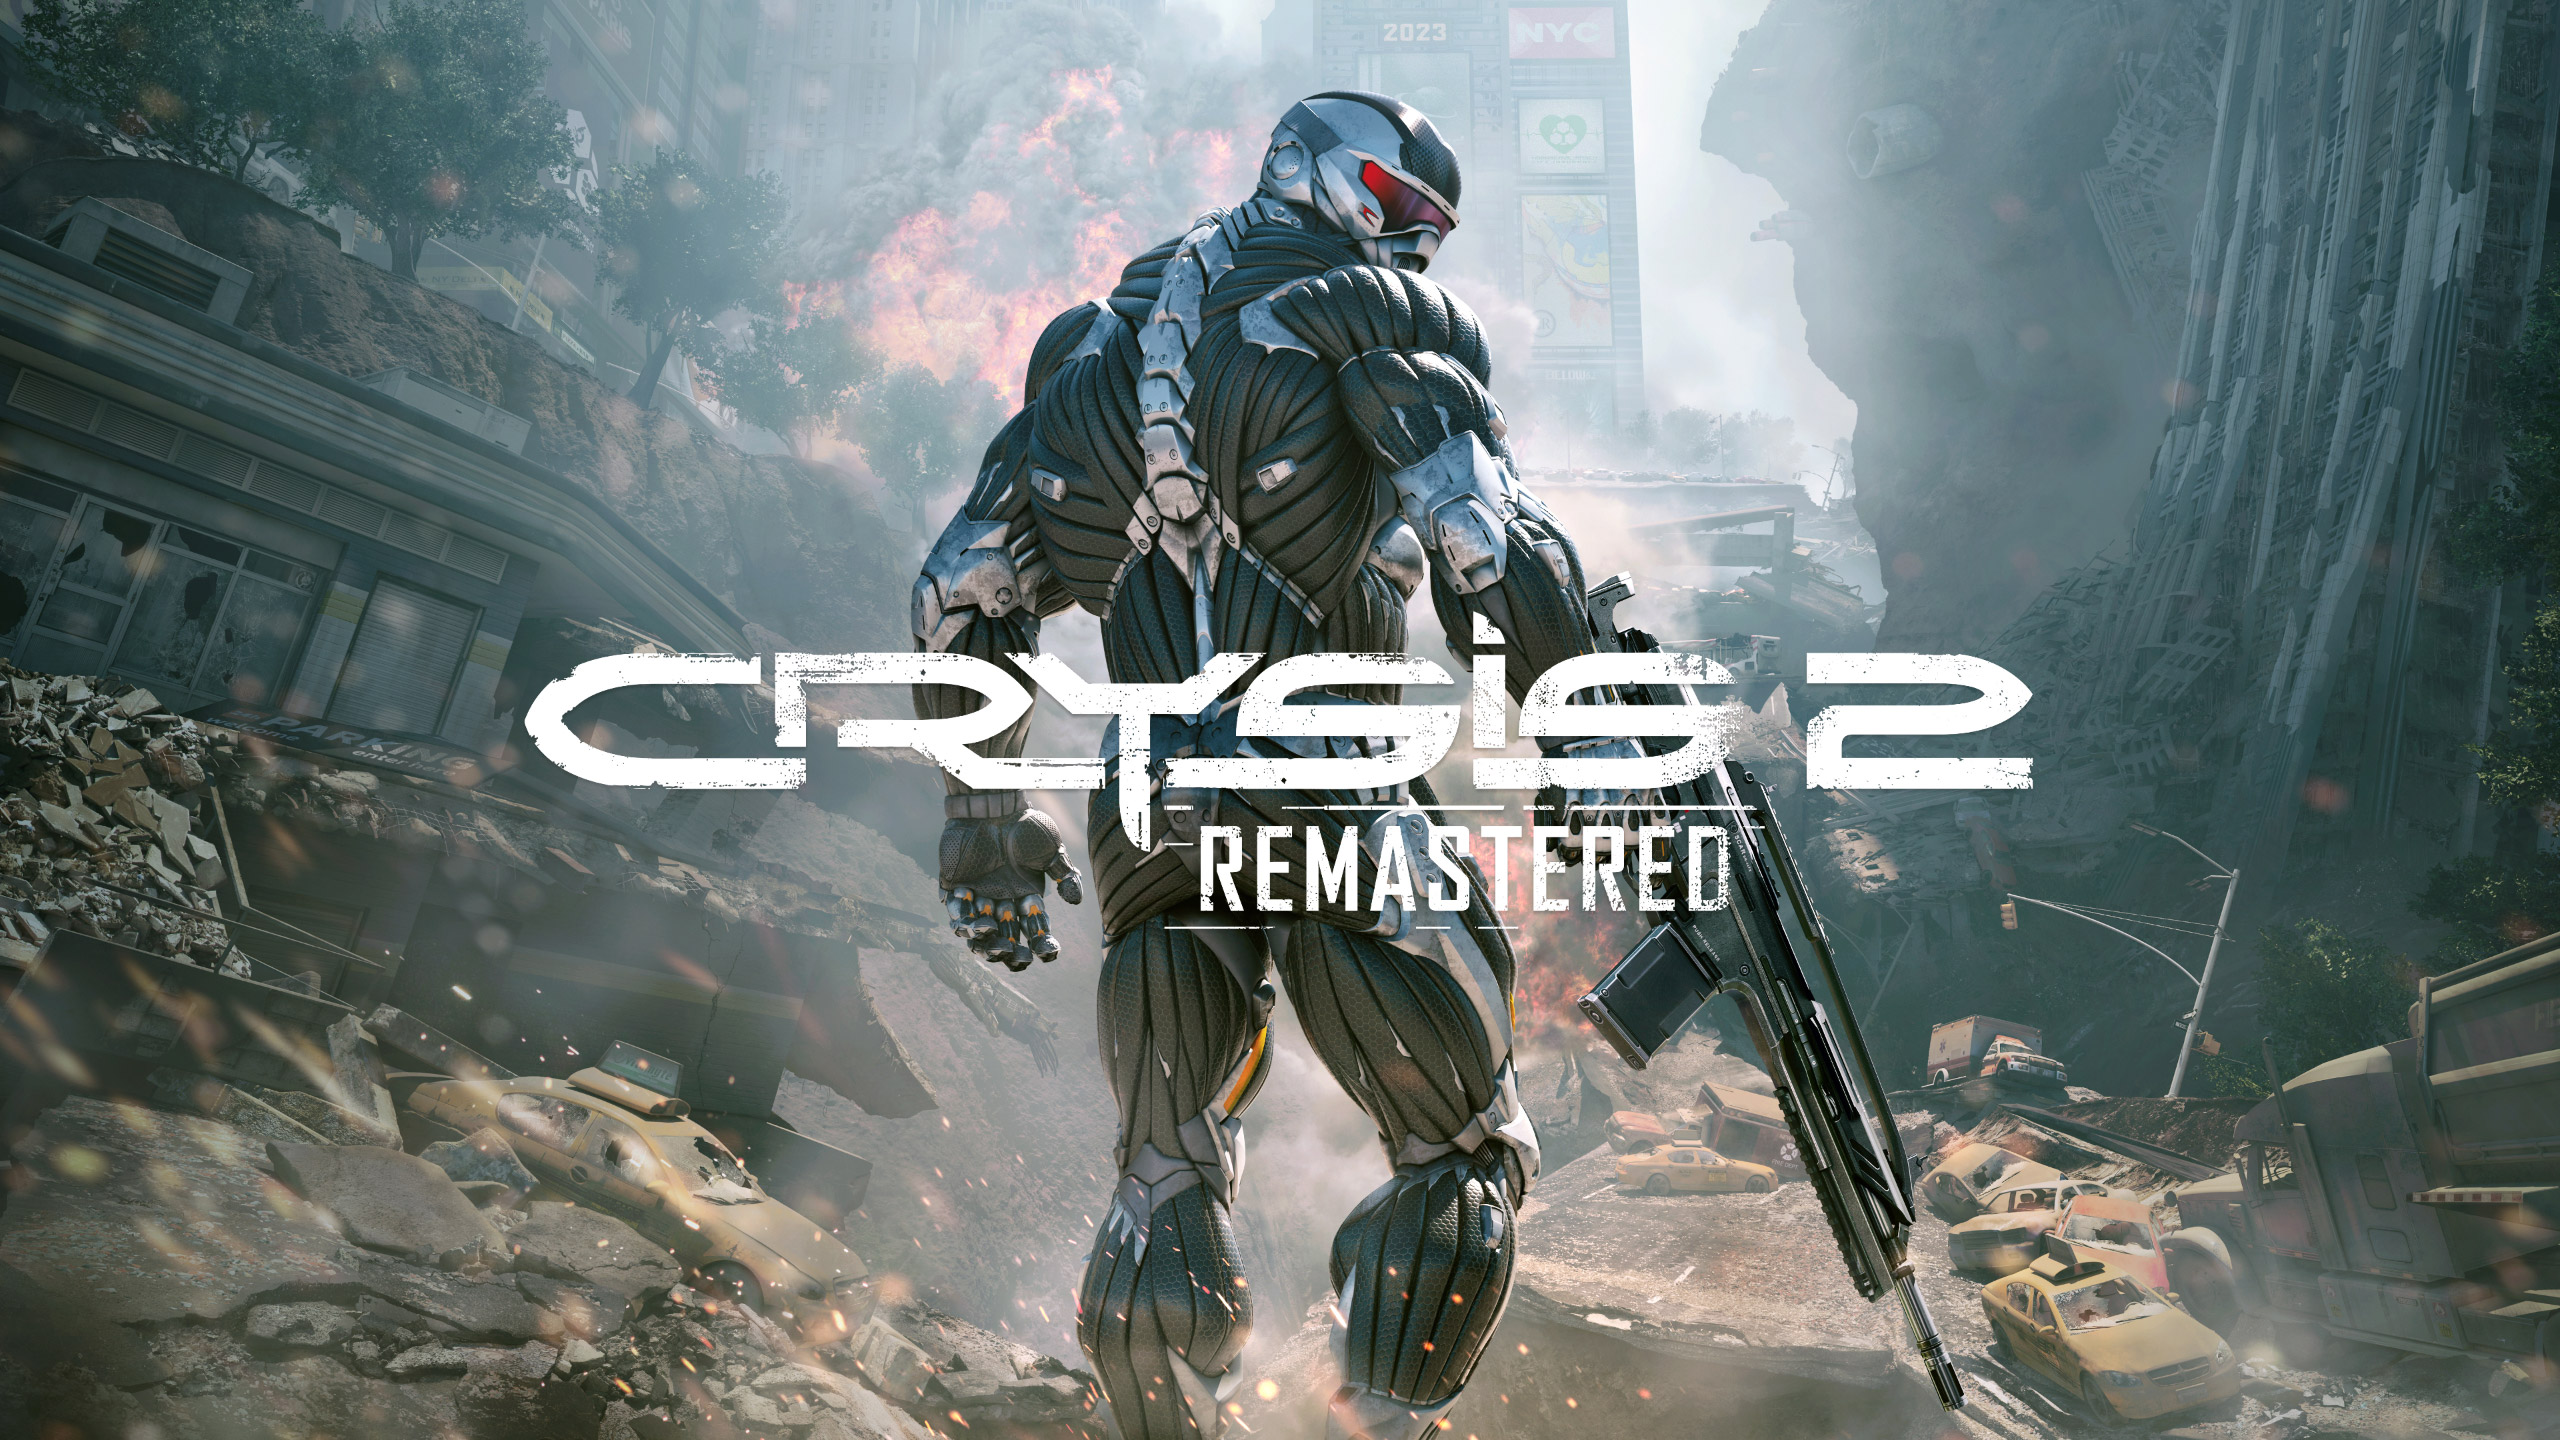 Crysis Free Download For PC